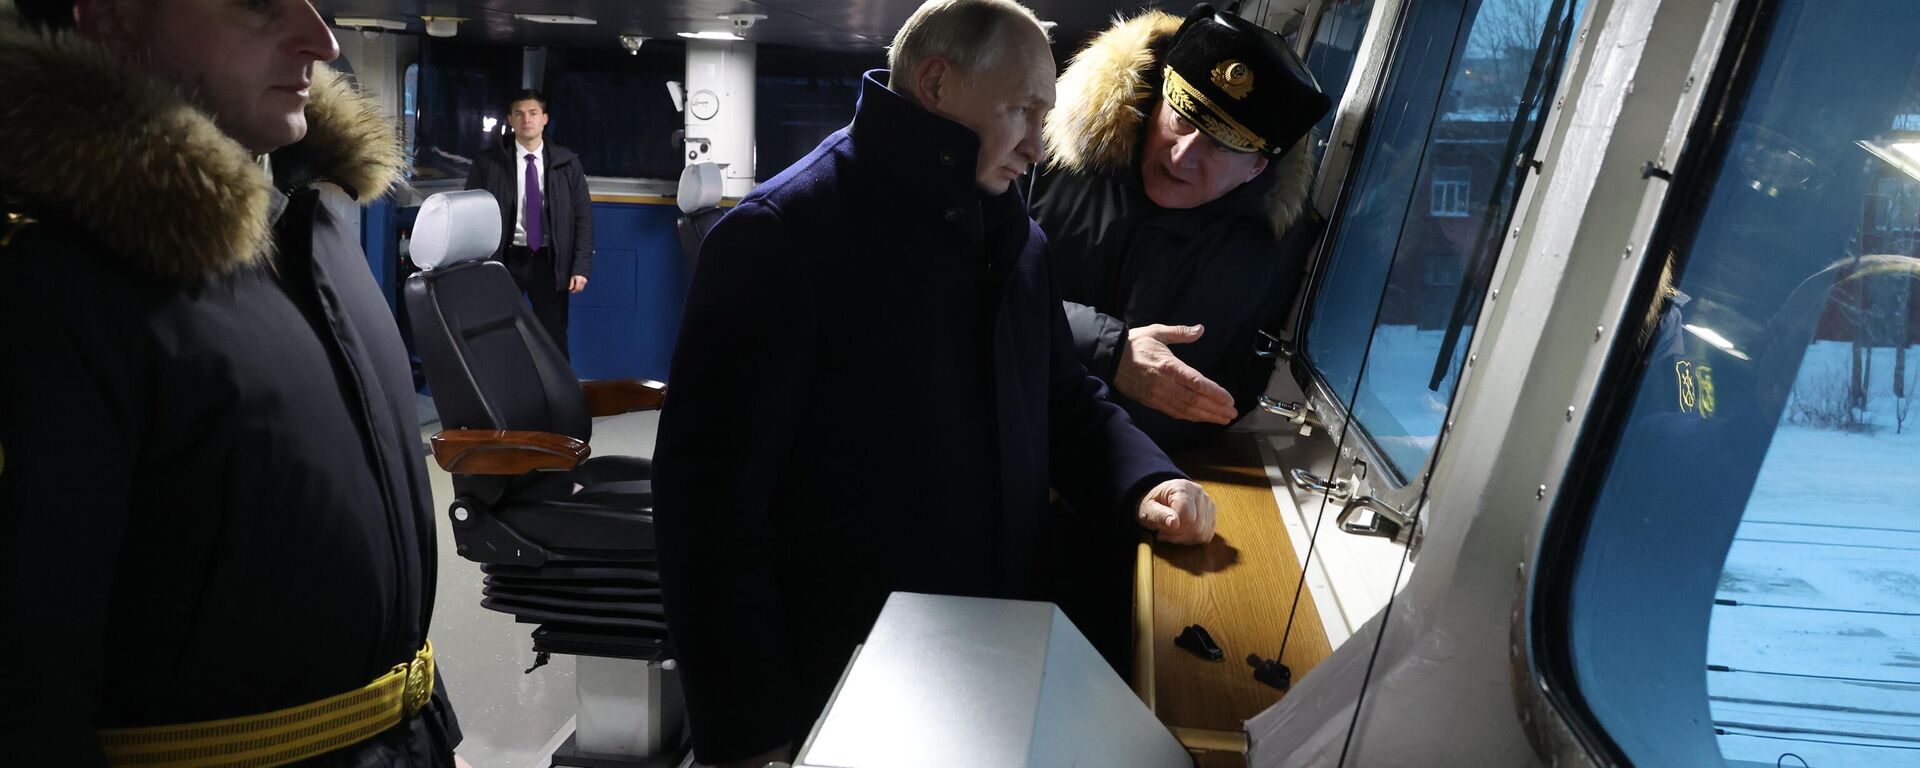 Russian President Vladimir Putin pays a visit to Severodvinsk, northern Russia to inspect new Russian warships and submarines armed with hypersonic weaponry. December 11, 2023. Speaking to Putin is Admiral Nikolai Yevmenov, Commander-in-Chief of the Russian Navy. - Sputnik International, 1920, 16.12.2023